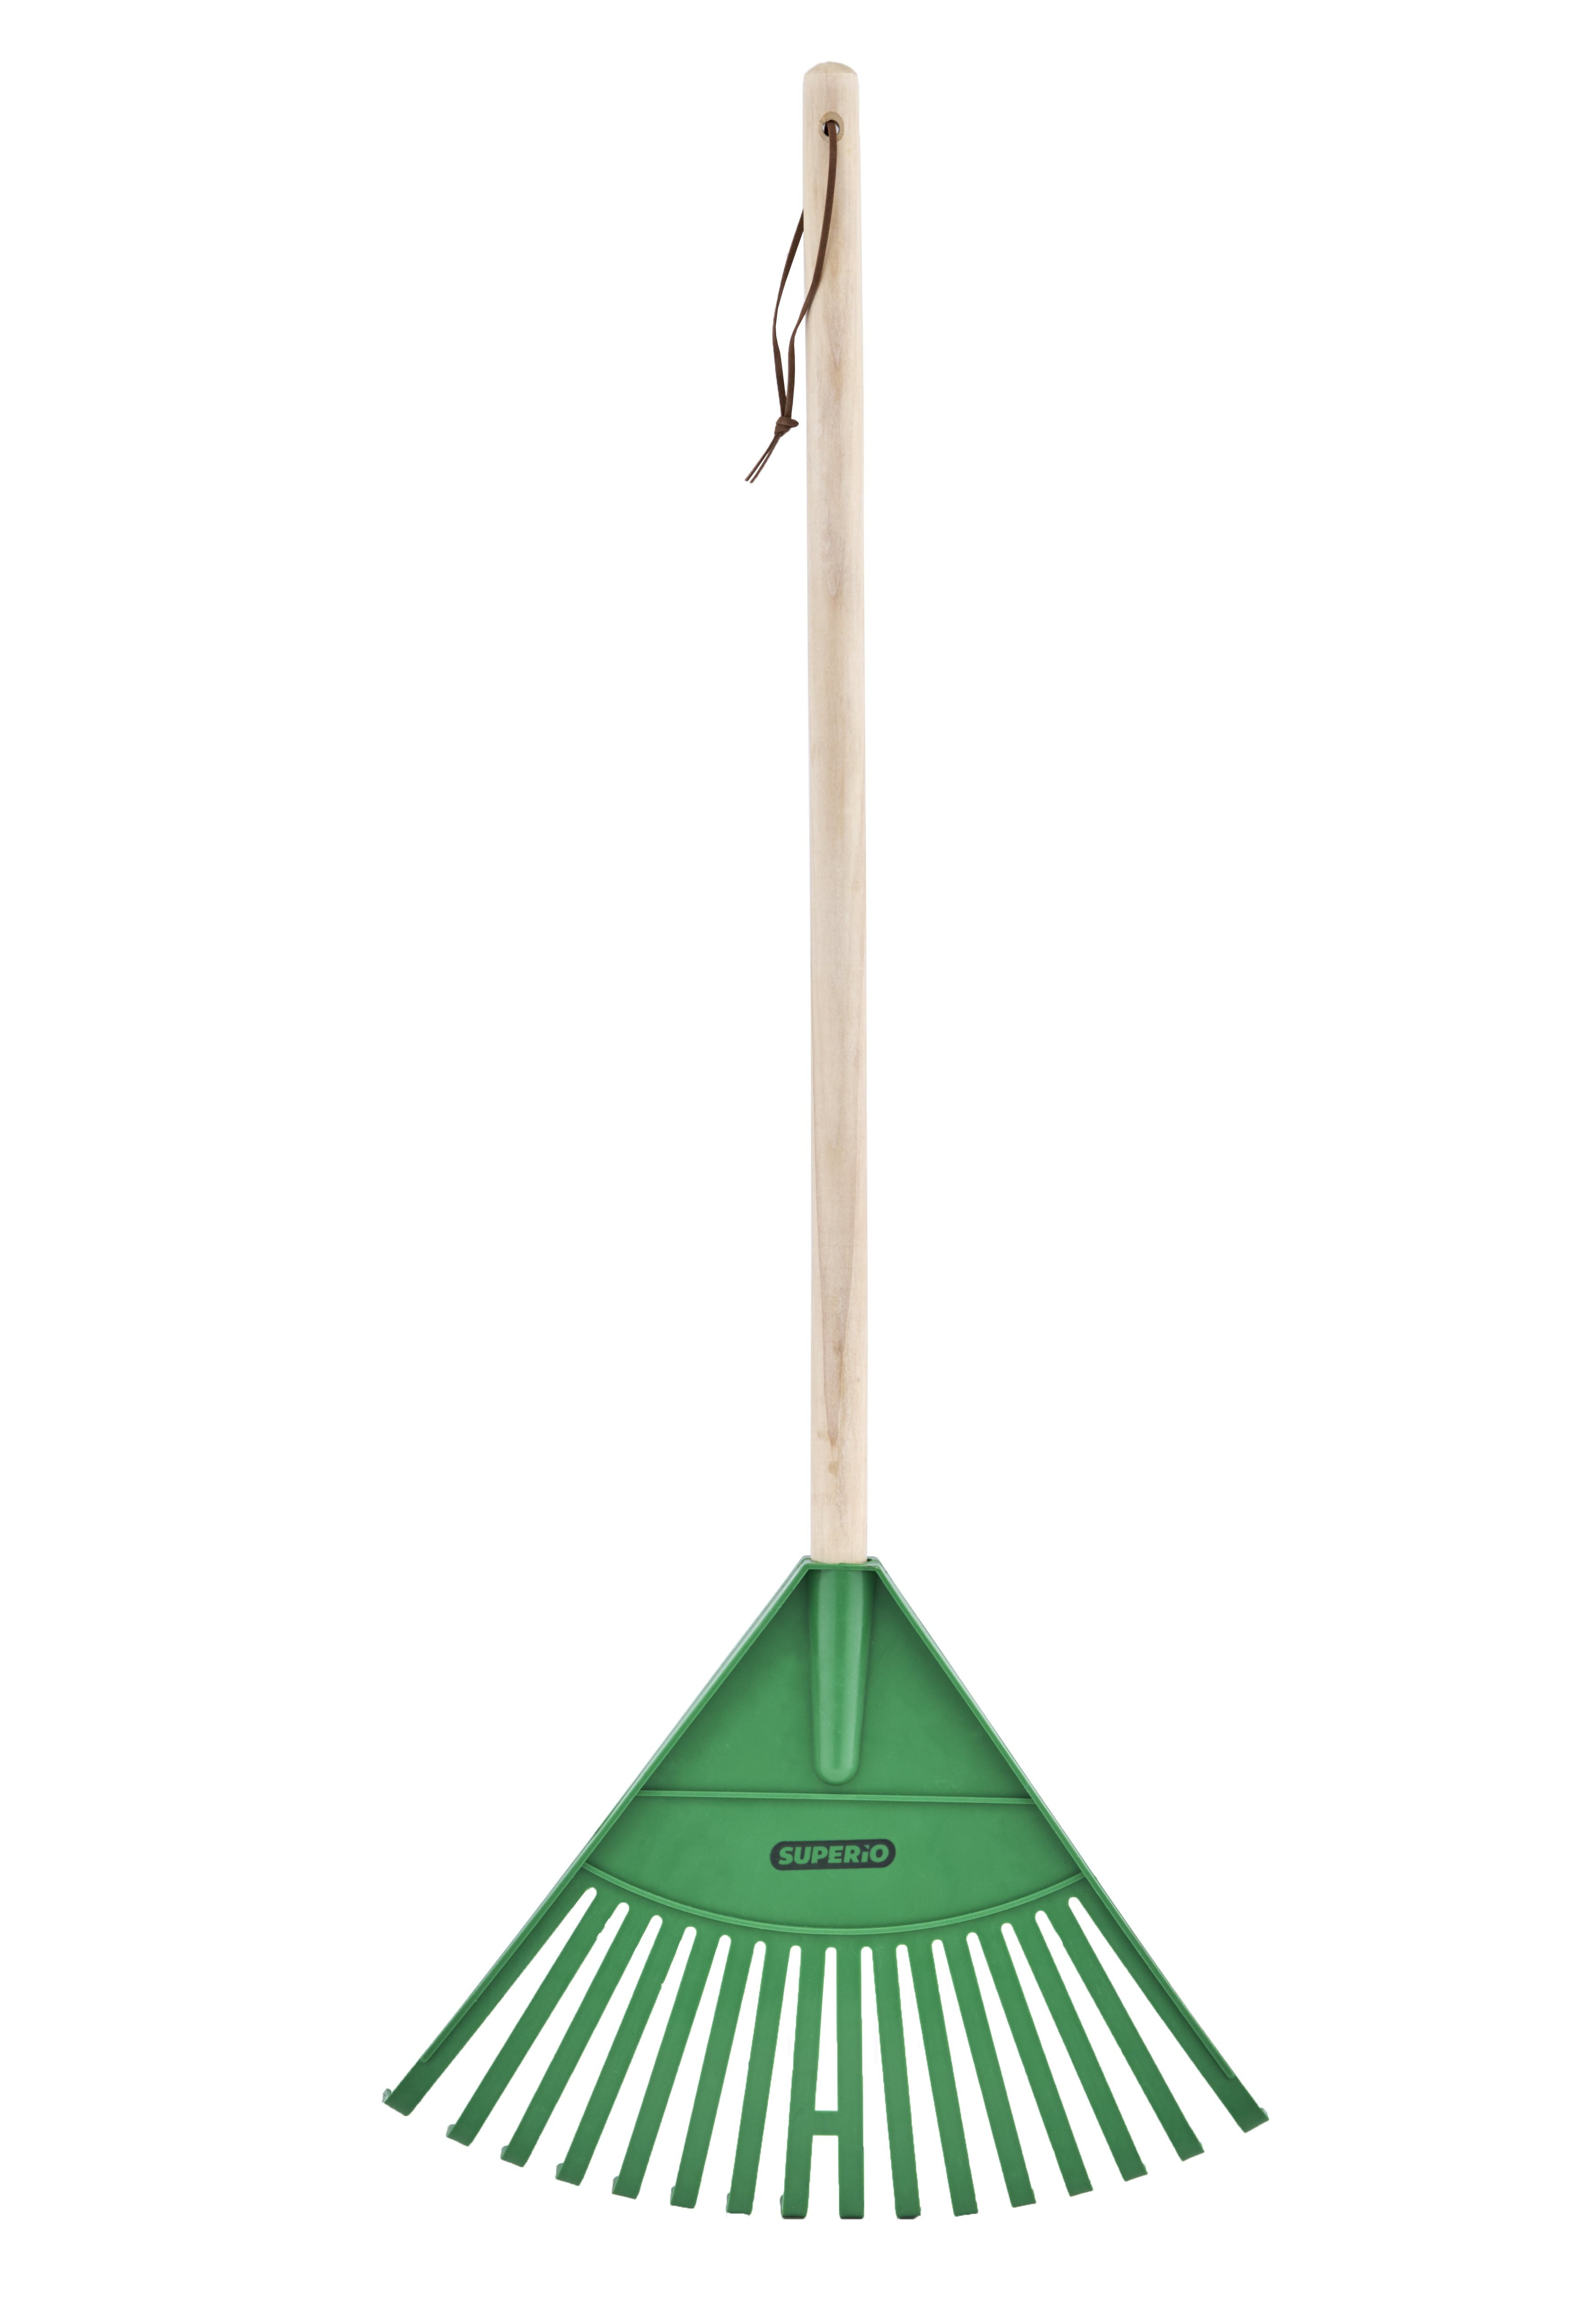 Superio Adult and Kids Rake Bundle with Hardwood Handle Durable Plastic Collect Loose Debris Among Delicate Plants and Yards Lawns 